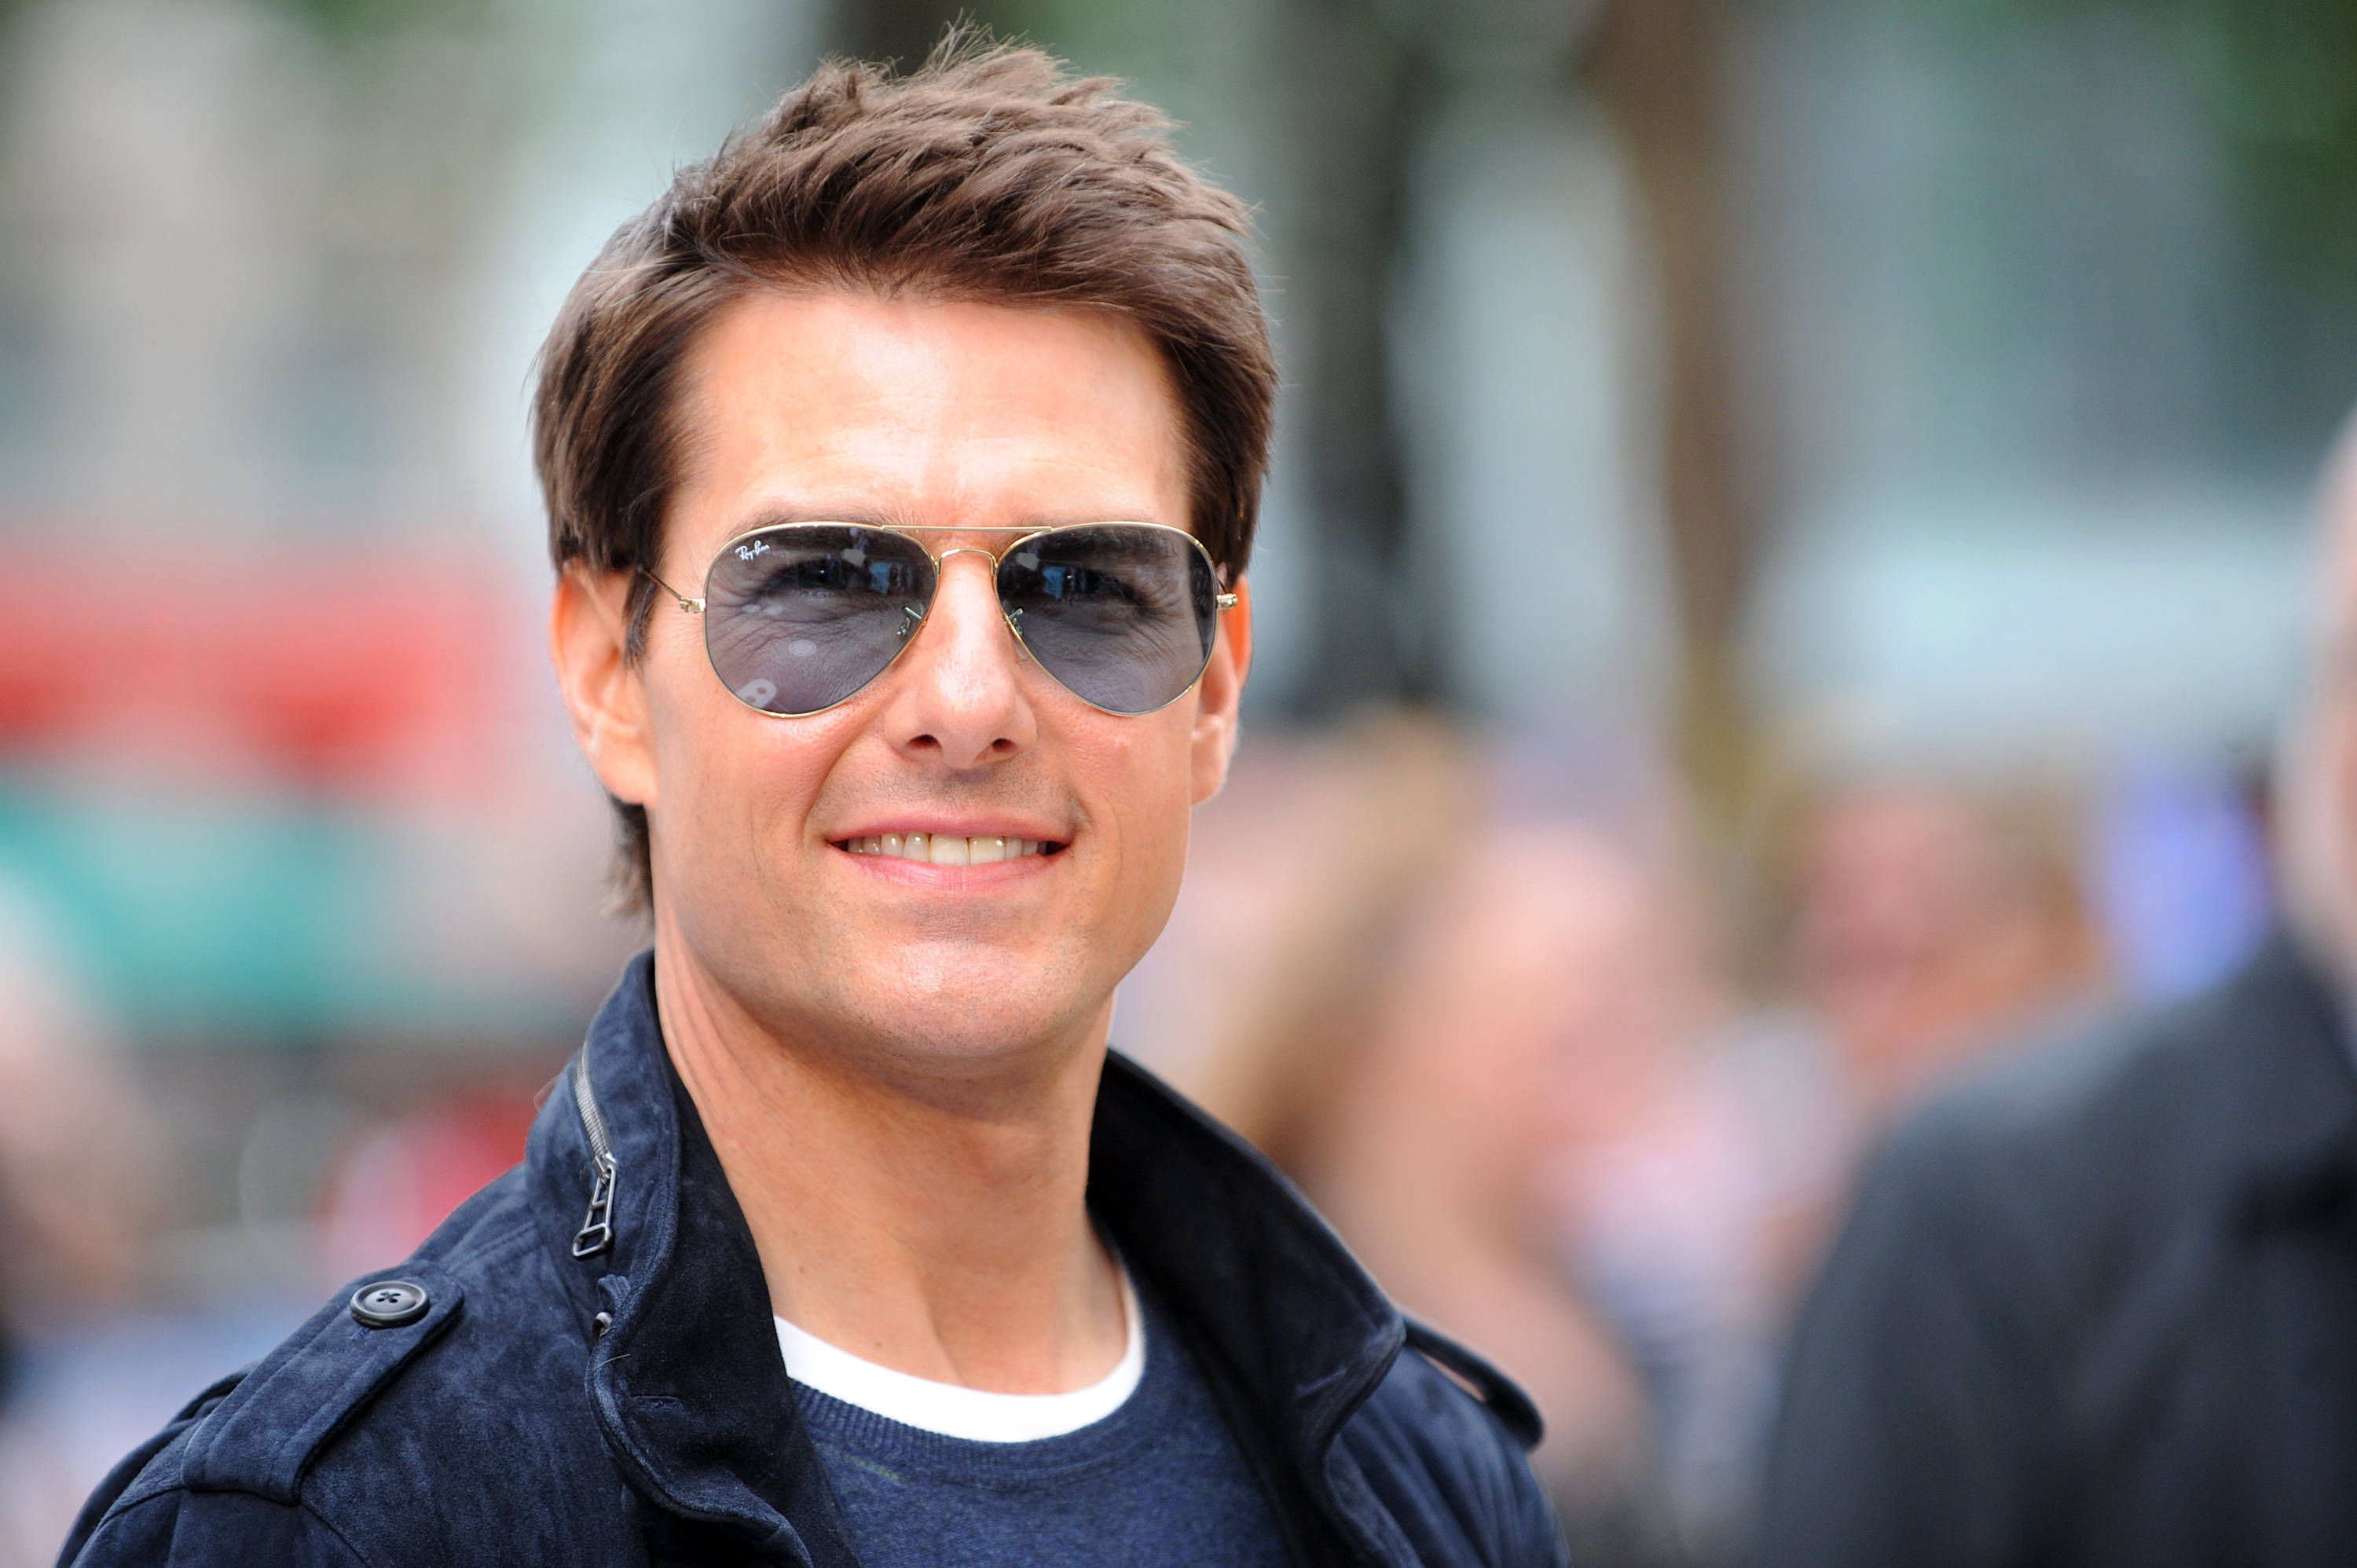 Tom Cruise attends the European premiere of "Rock Of Ages" at Odeon Leicester Square on June 10, 2012 in London, England | Source: Getty Images